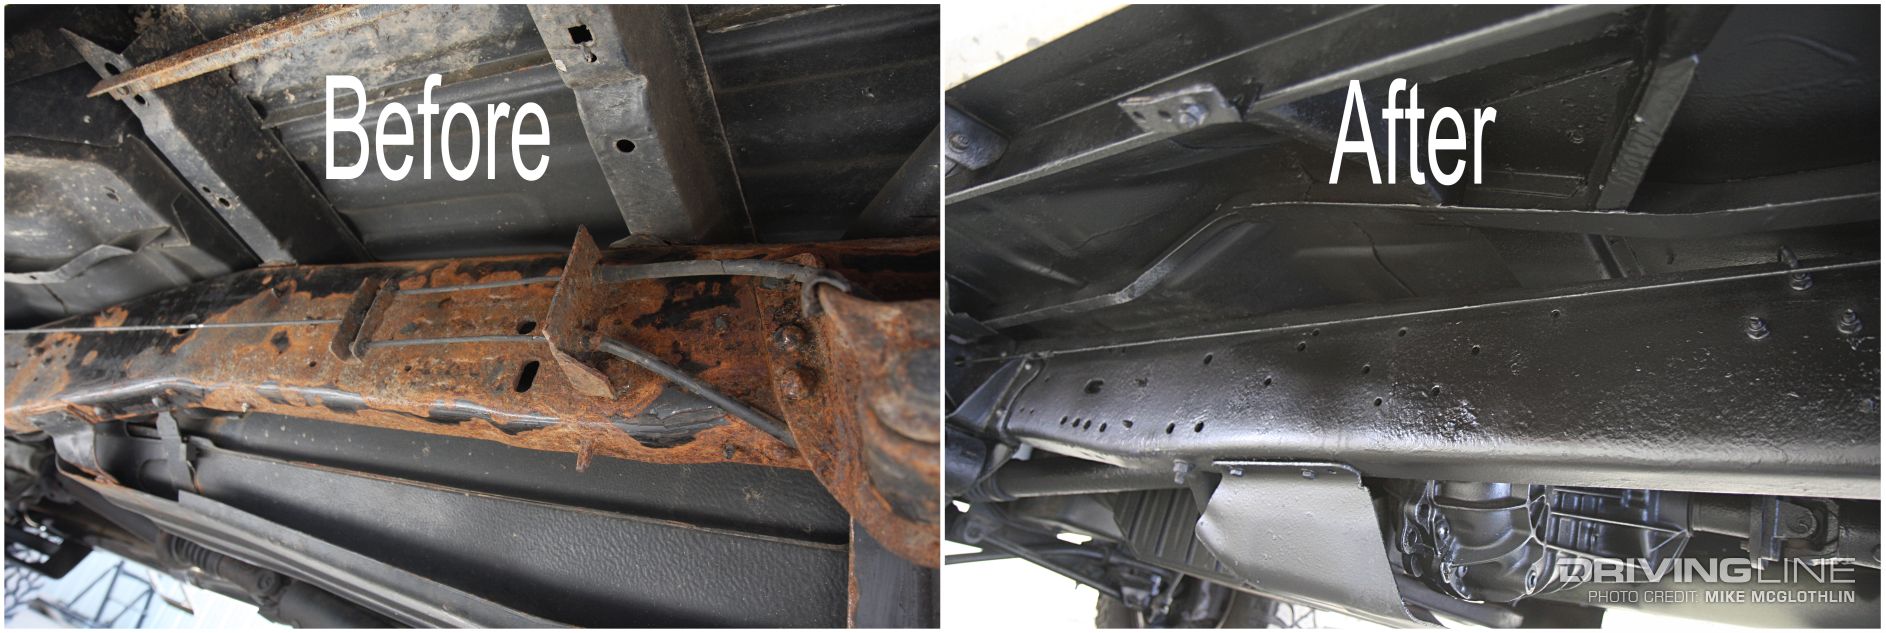 Stop rust on car undercarriage